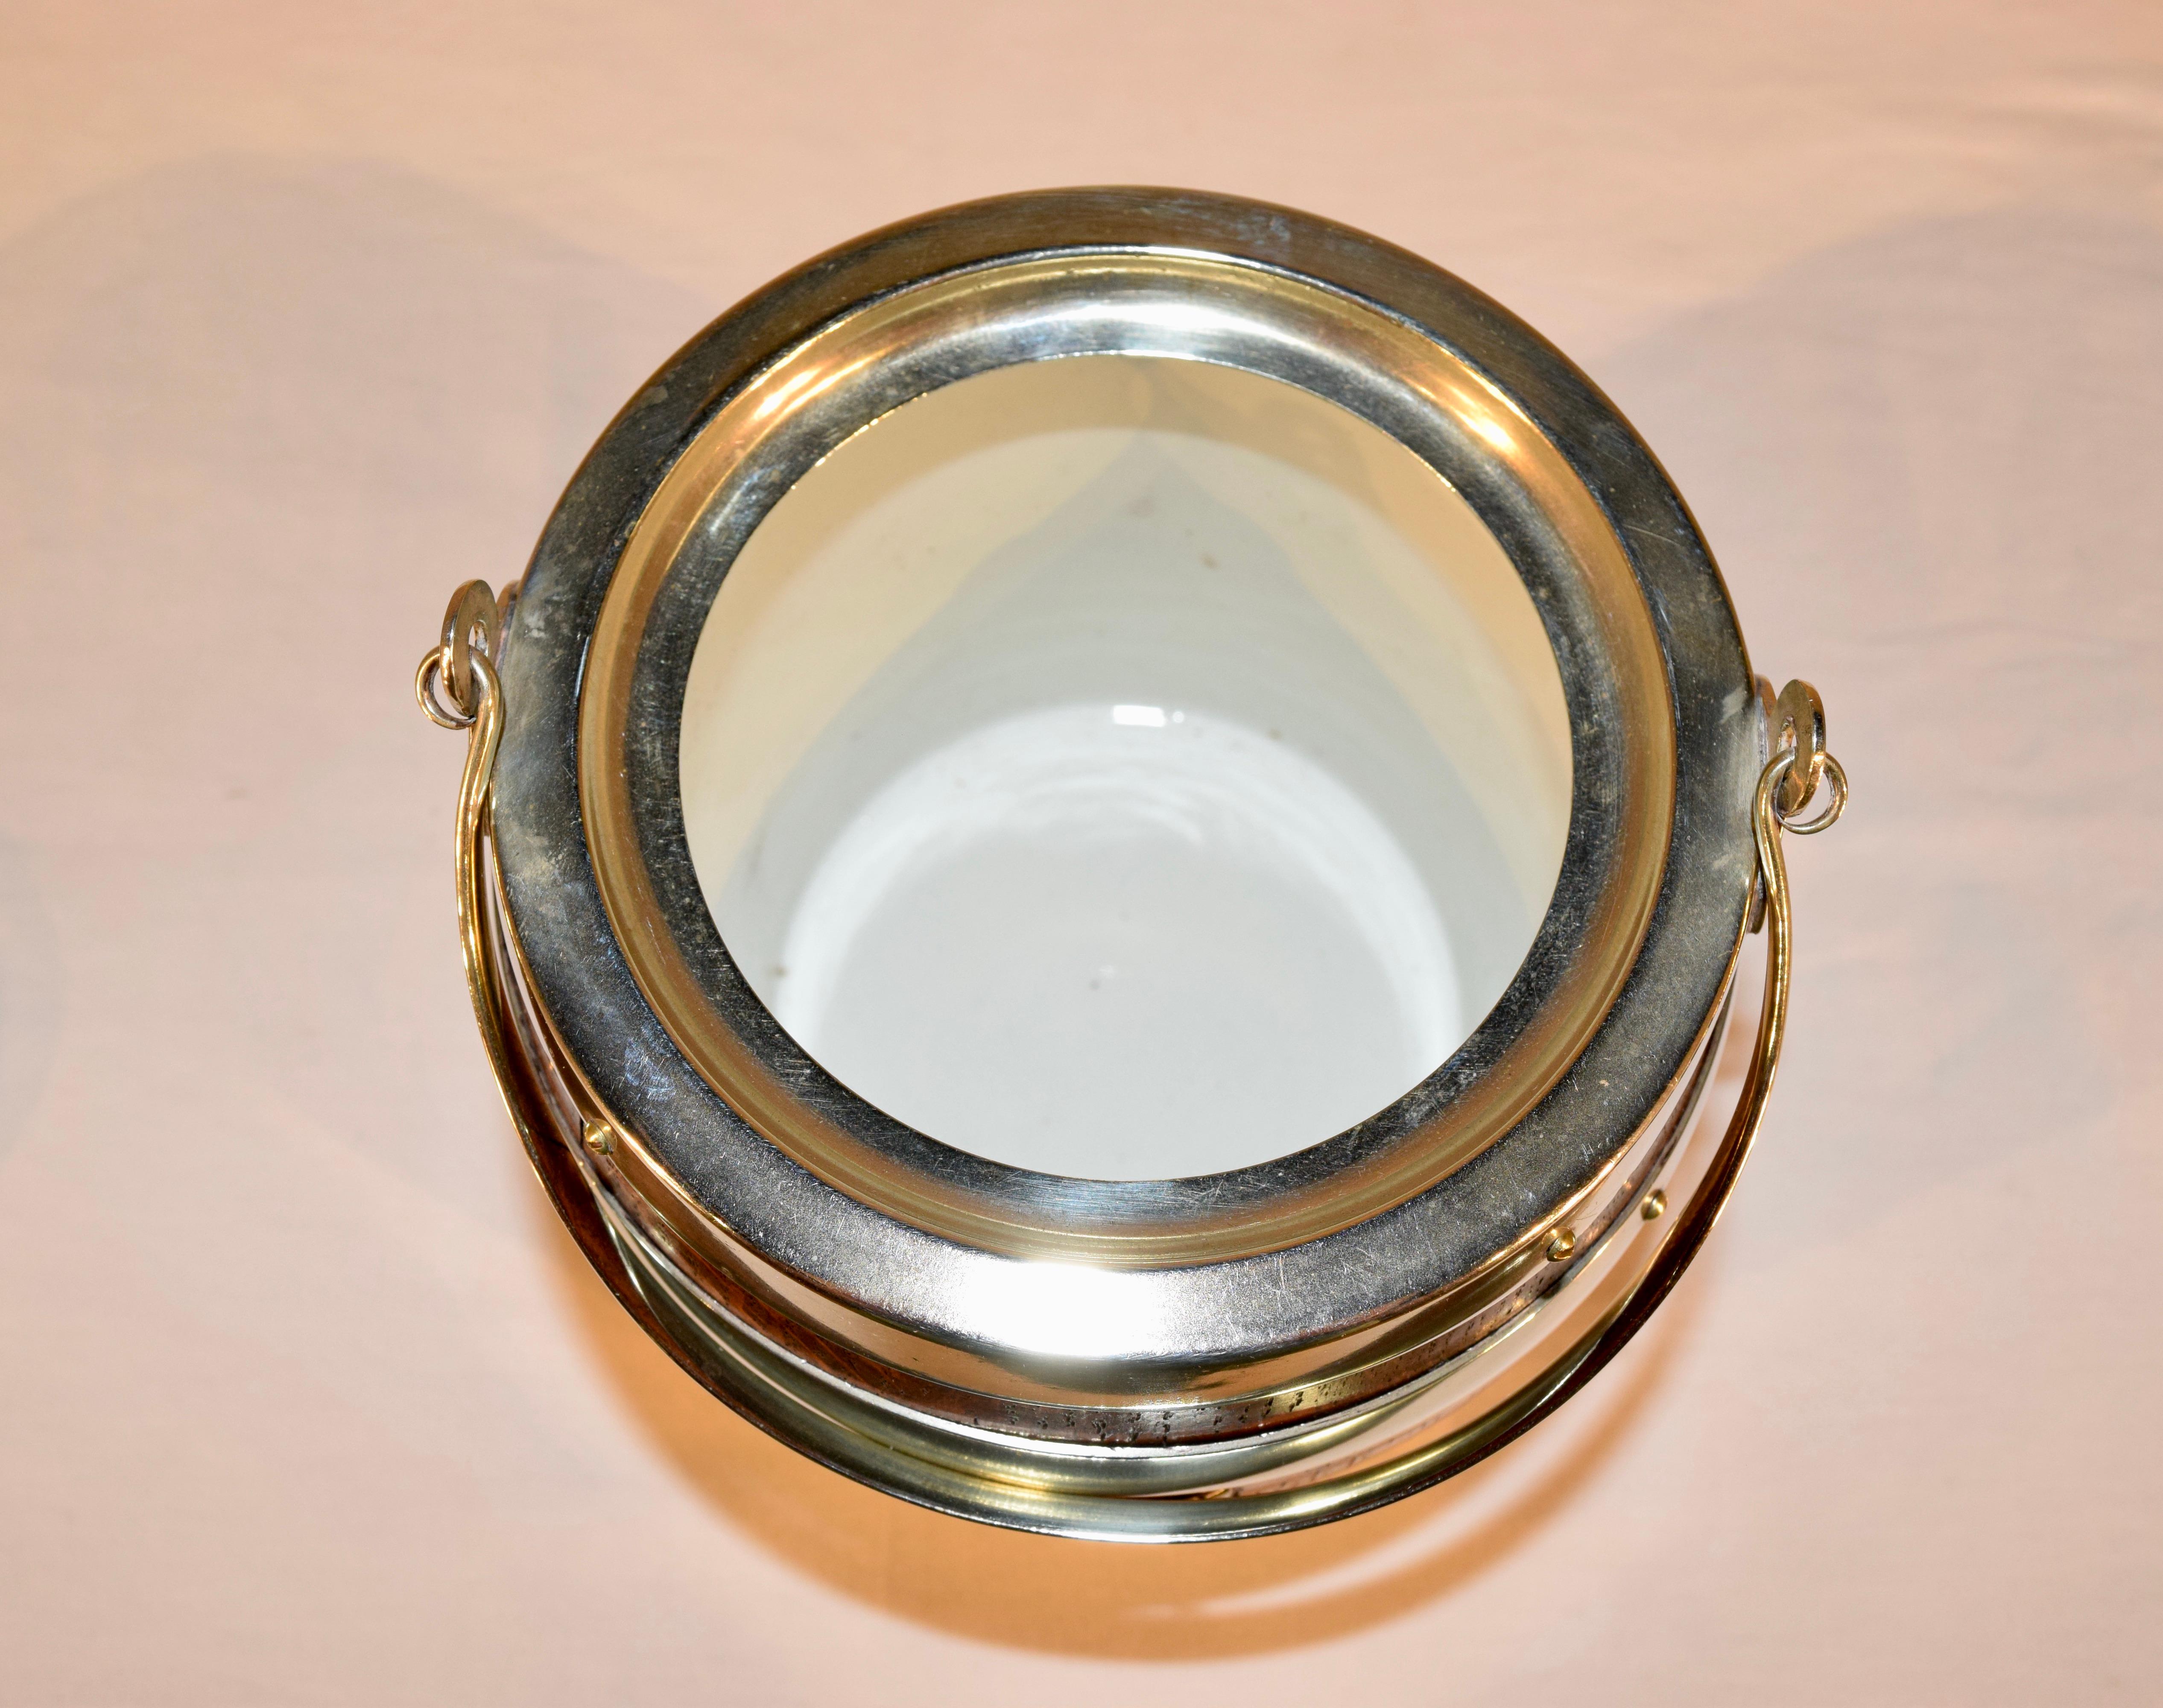 Edwardian English Silver Plated Biscuit Barrel, circa 1900